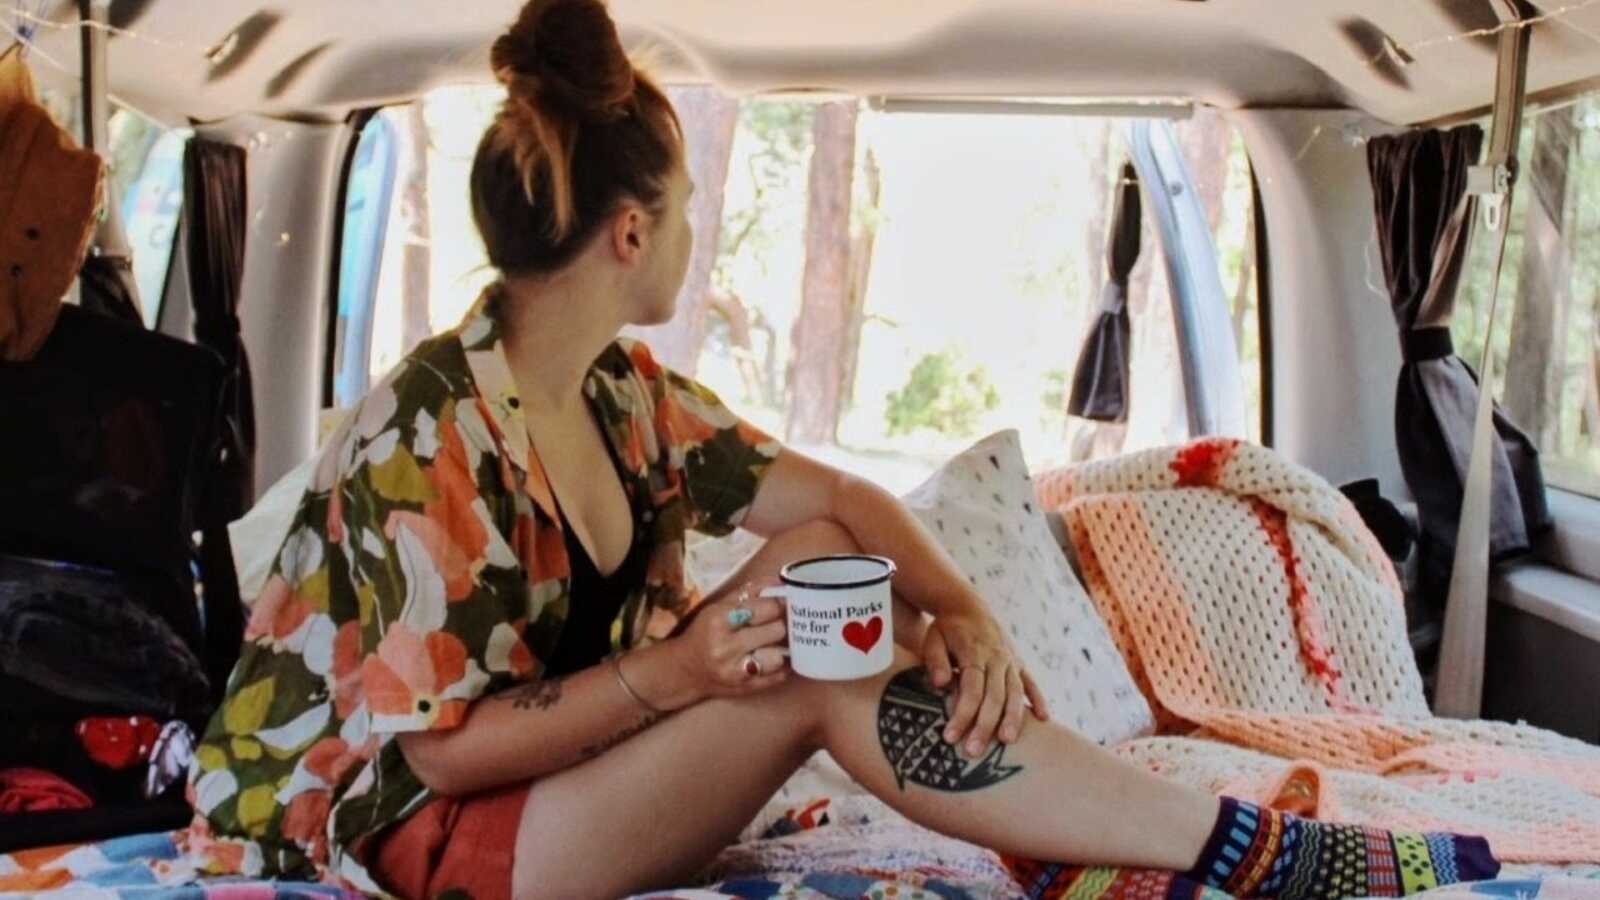 Van life traveler poses for an Instagram photo holding an empty coffee mug while sitting in the back of her van